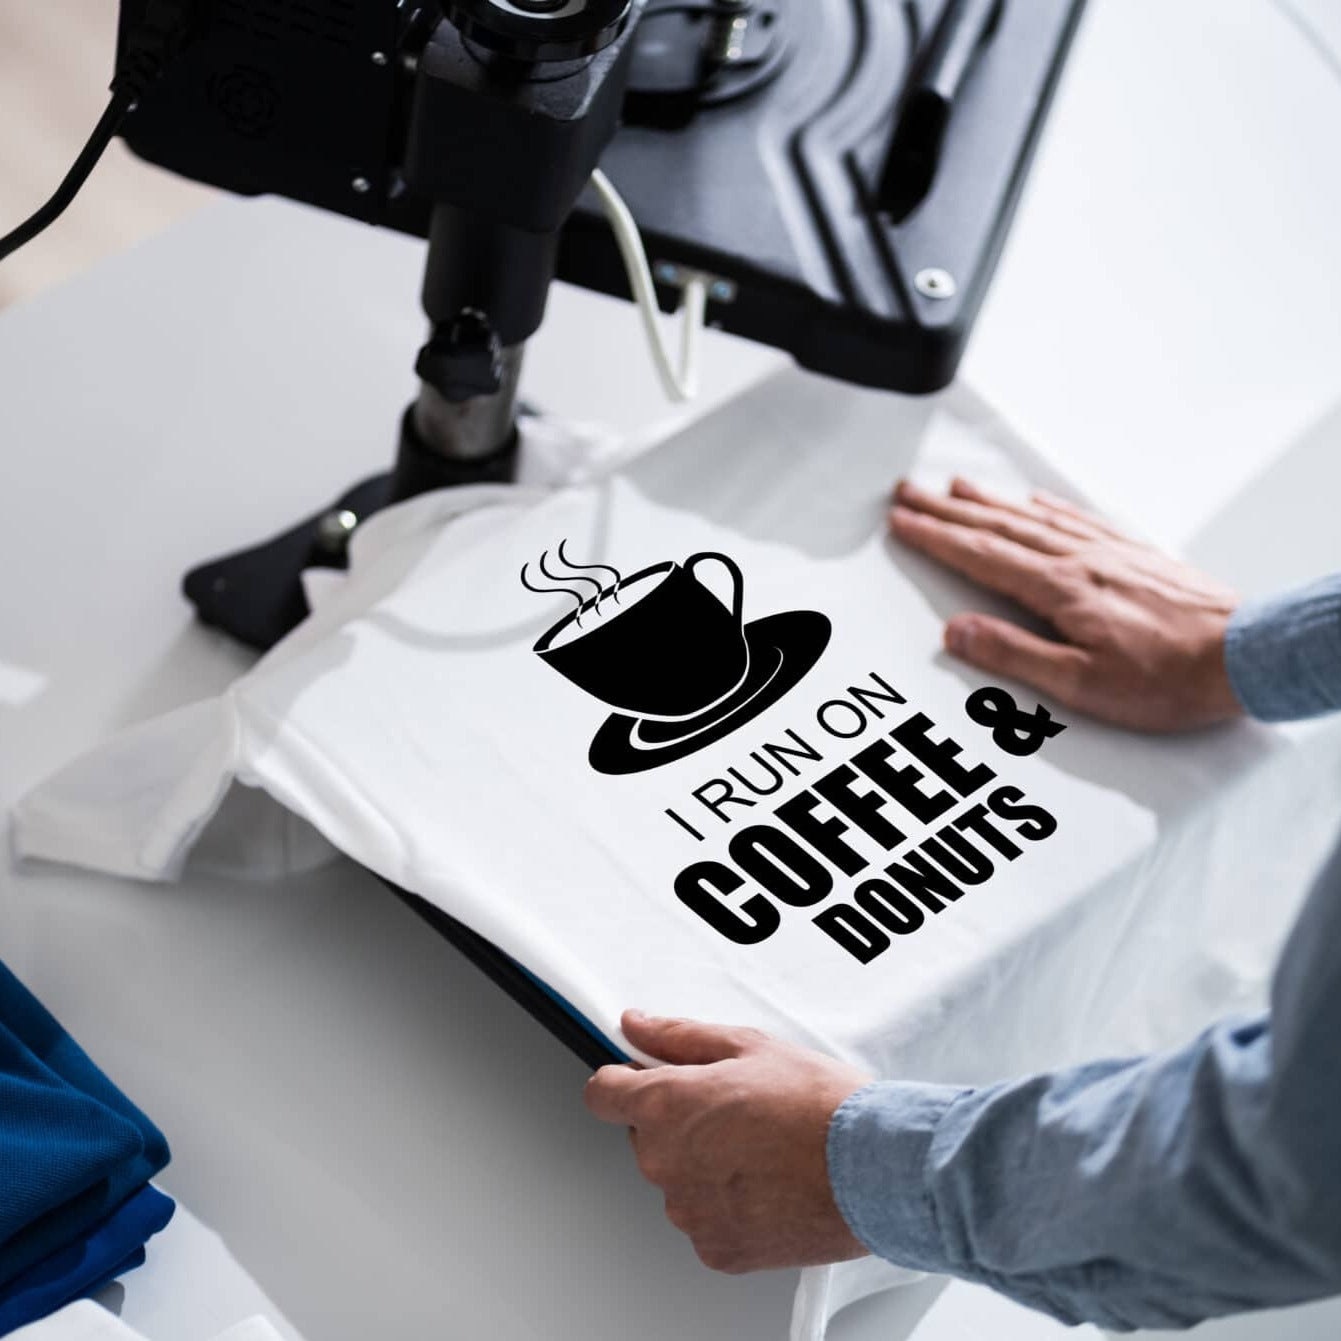 One-on-One - HOW TO START A T-SHIRT BUSINESS